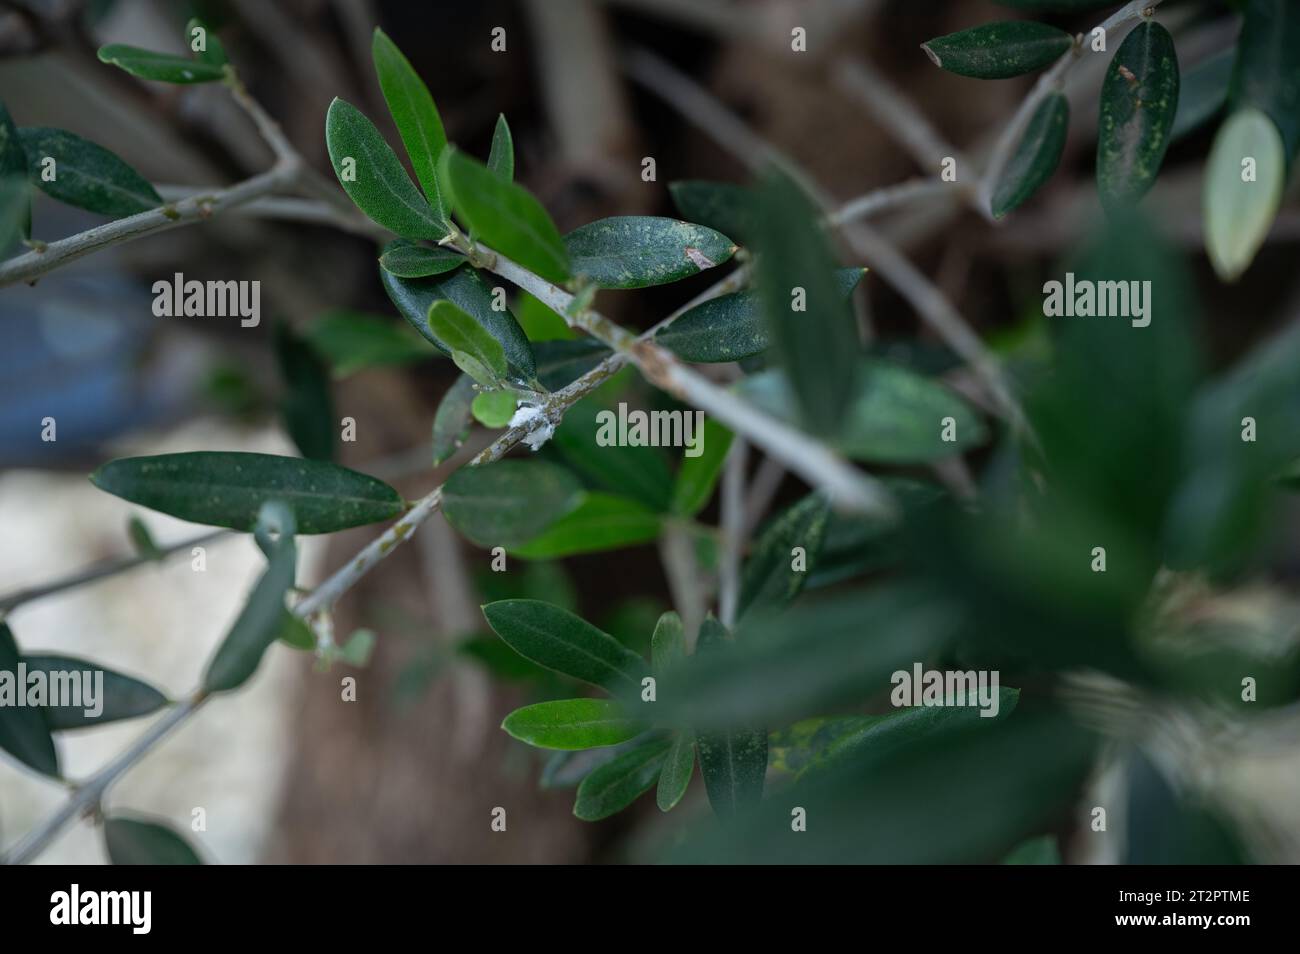 Infestation of white cotton wool-like mealybugs in the branches and on the leaves of an olive tree Stock Photo